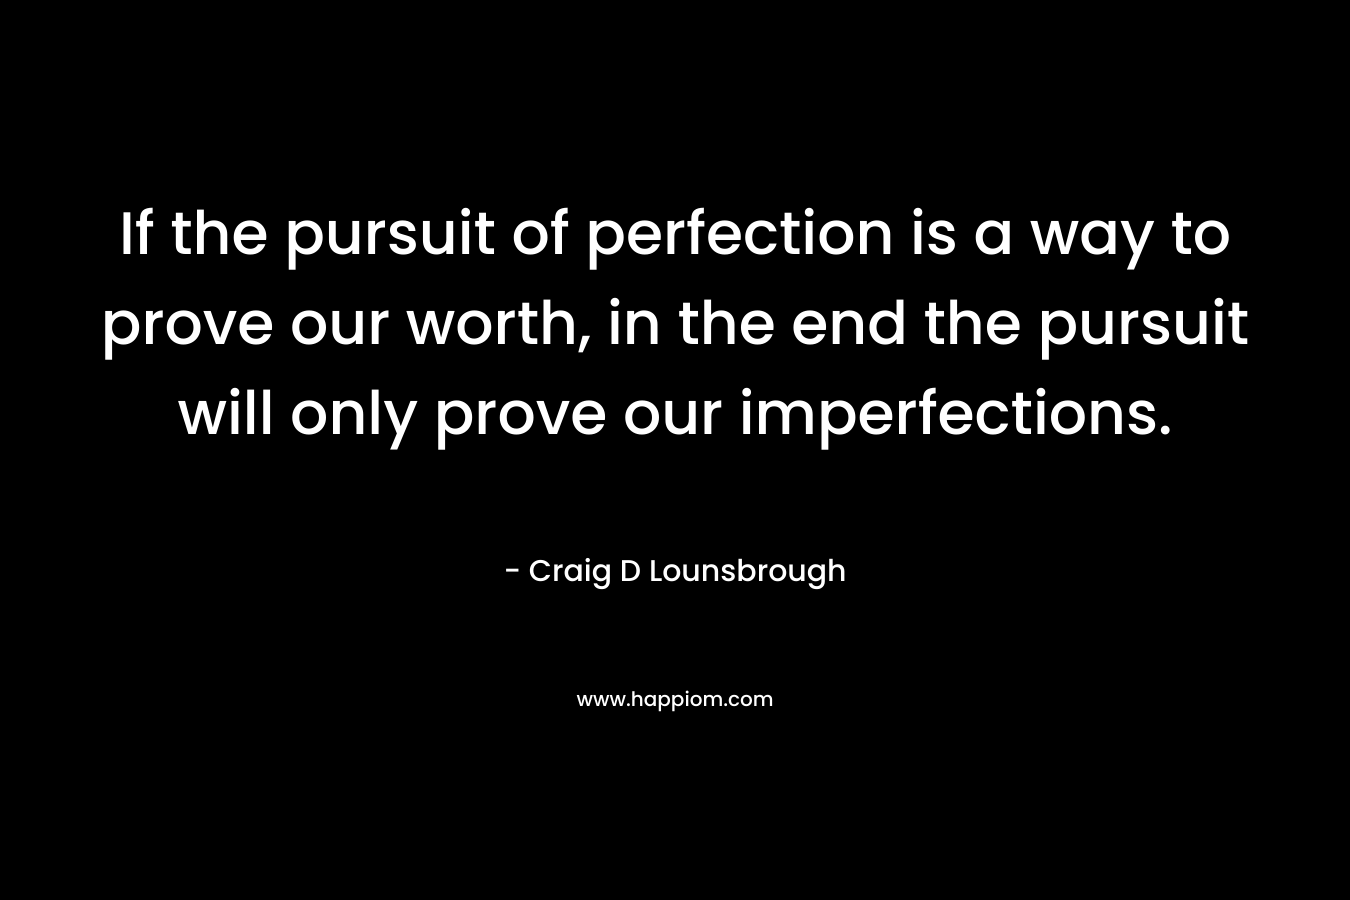 If the pursuit of perfection is a way to prove our worth, in the end the pursuit will only prove our imperfections.